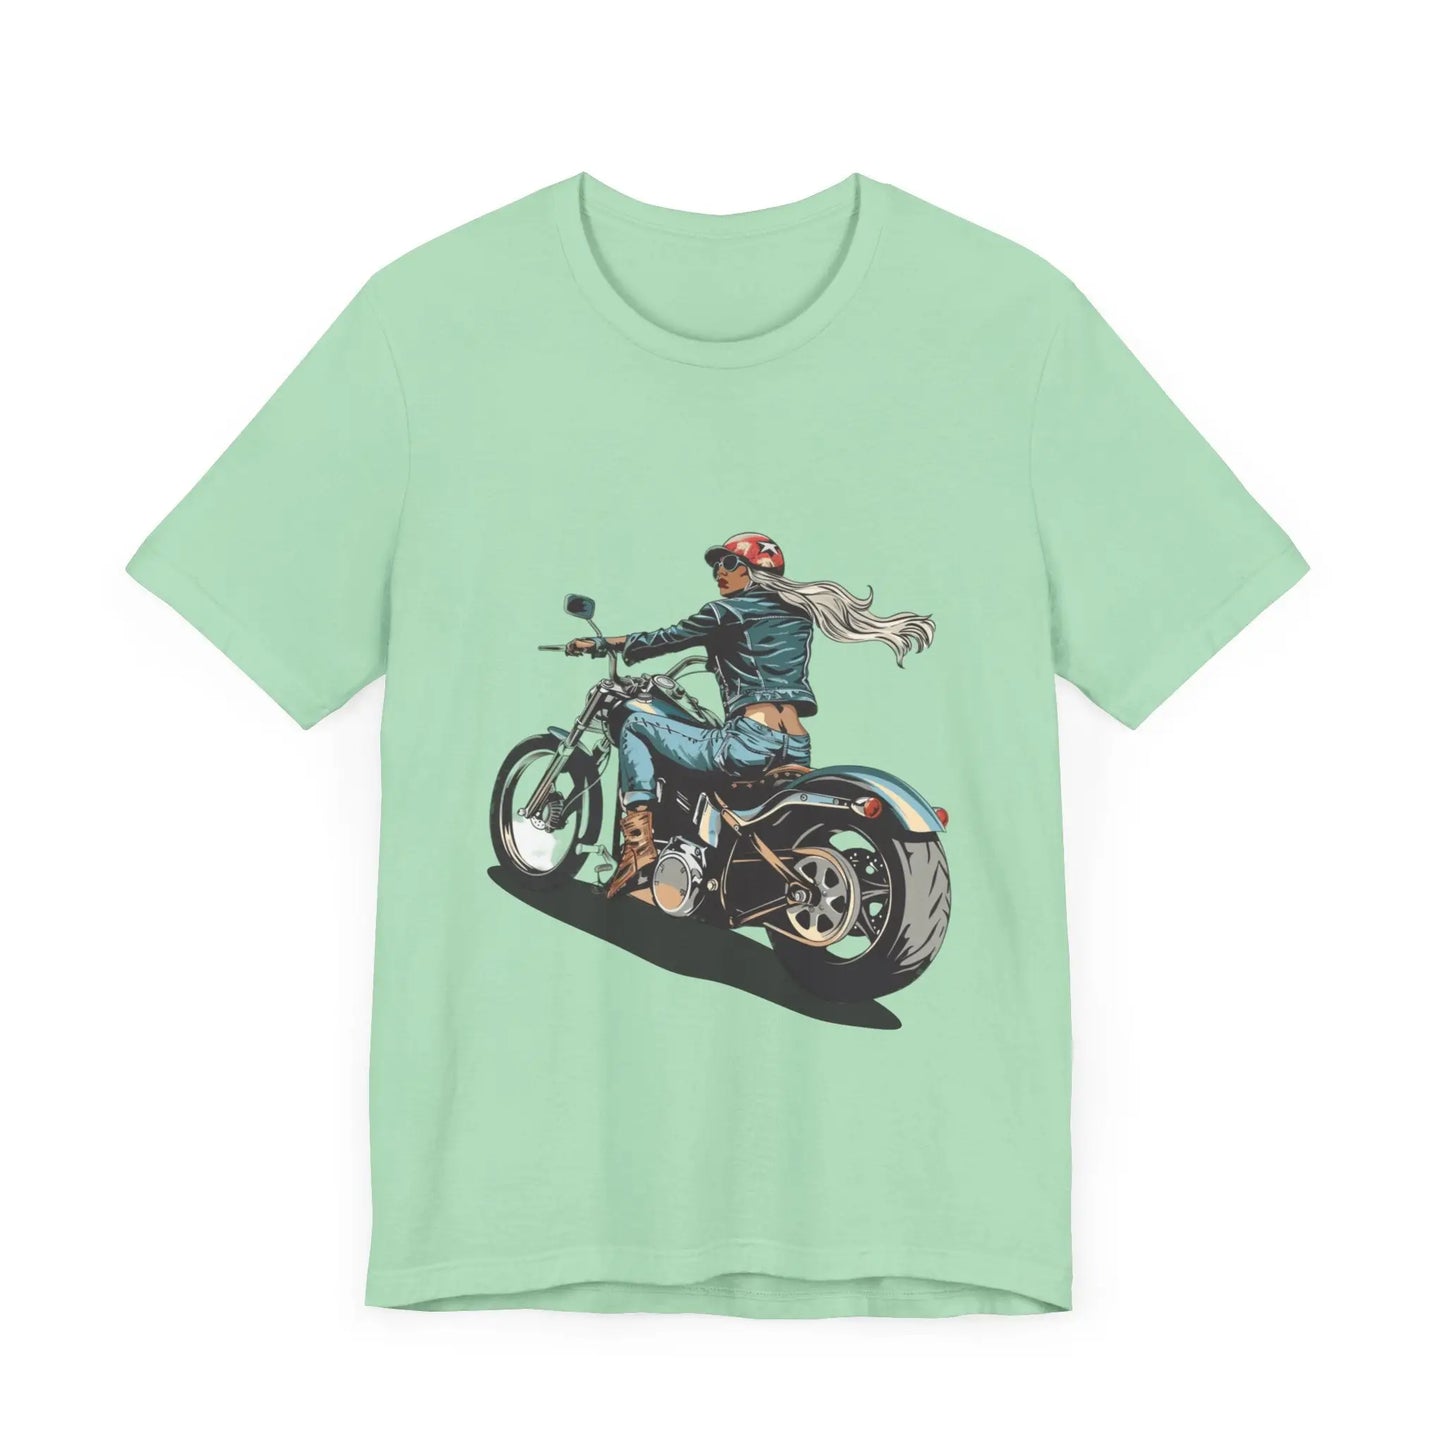 Wind Therapy Women's Tee - Wicked Tees